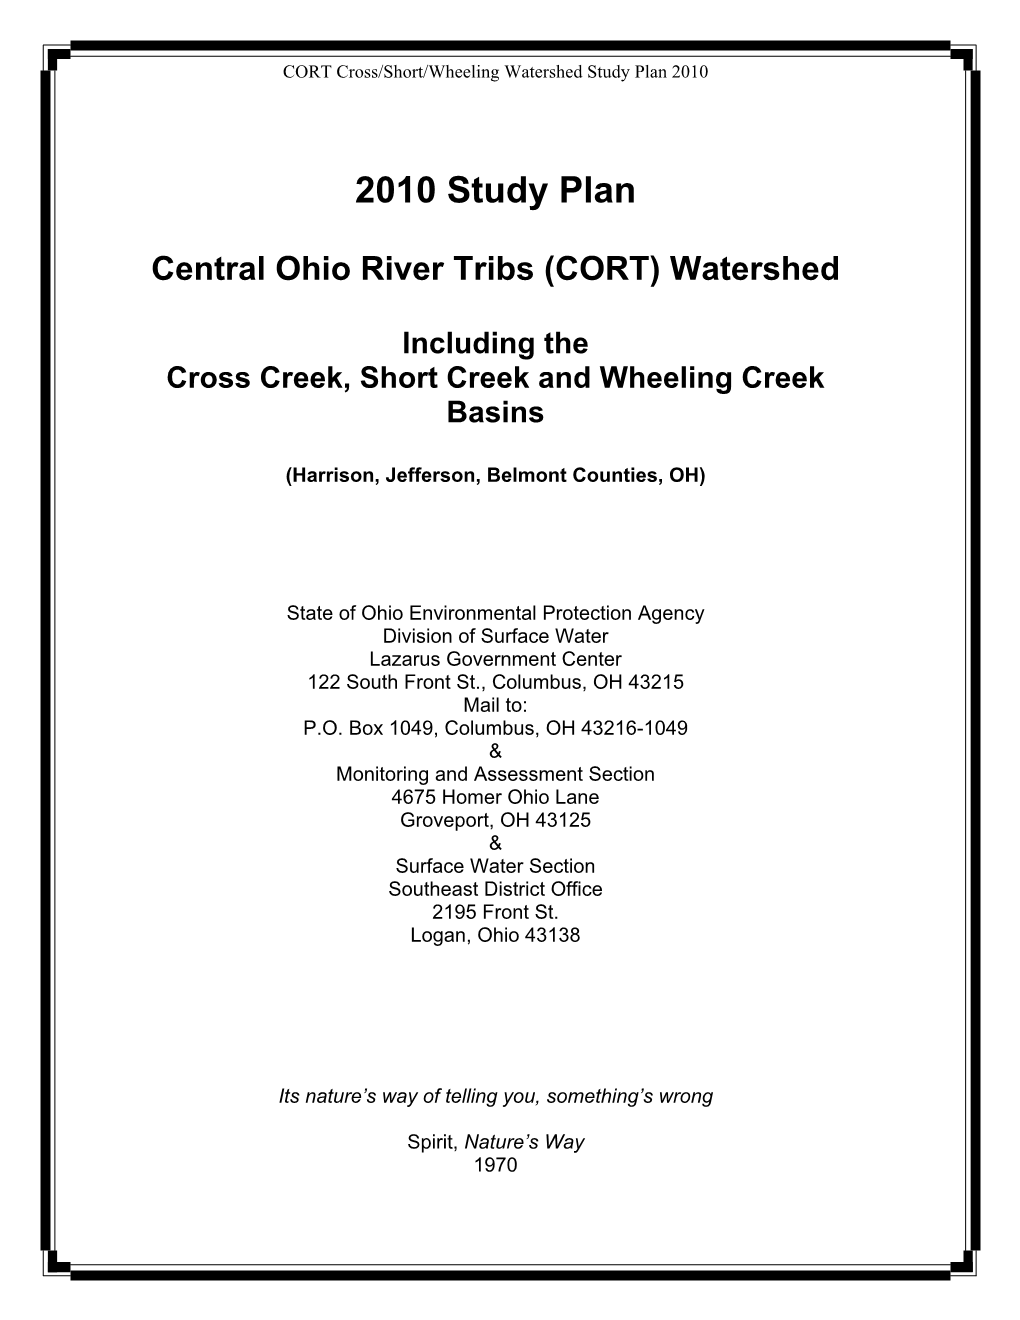 2010 Study Plan for Central Ohio River Tribs (CORT) Watershed